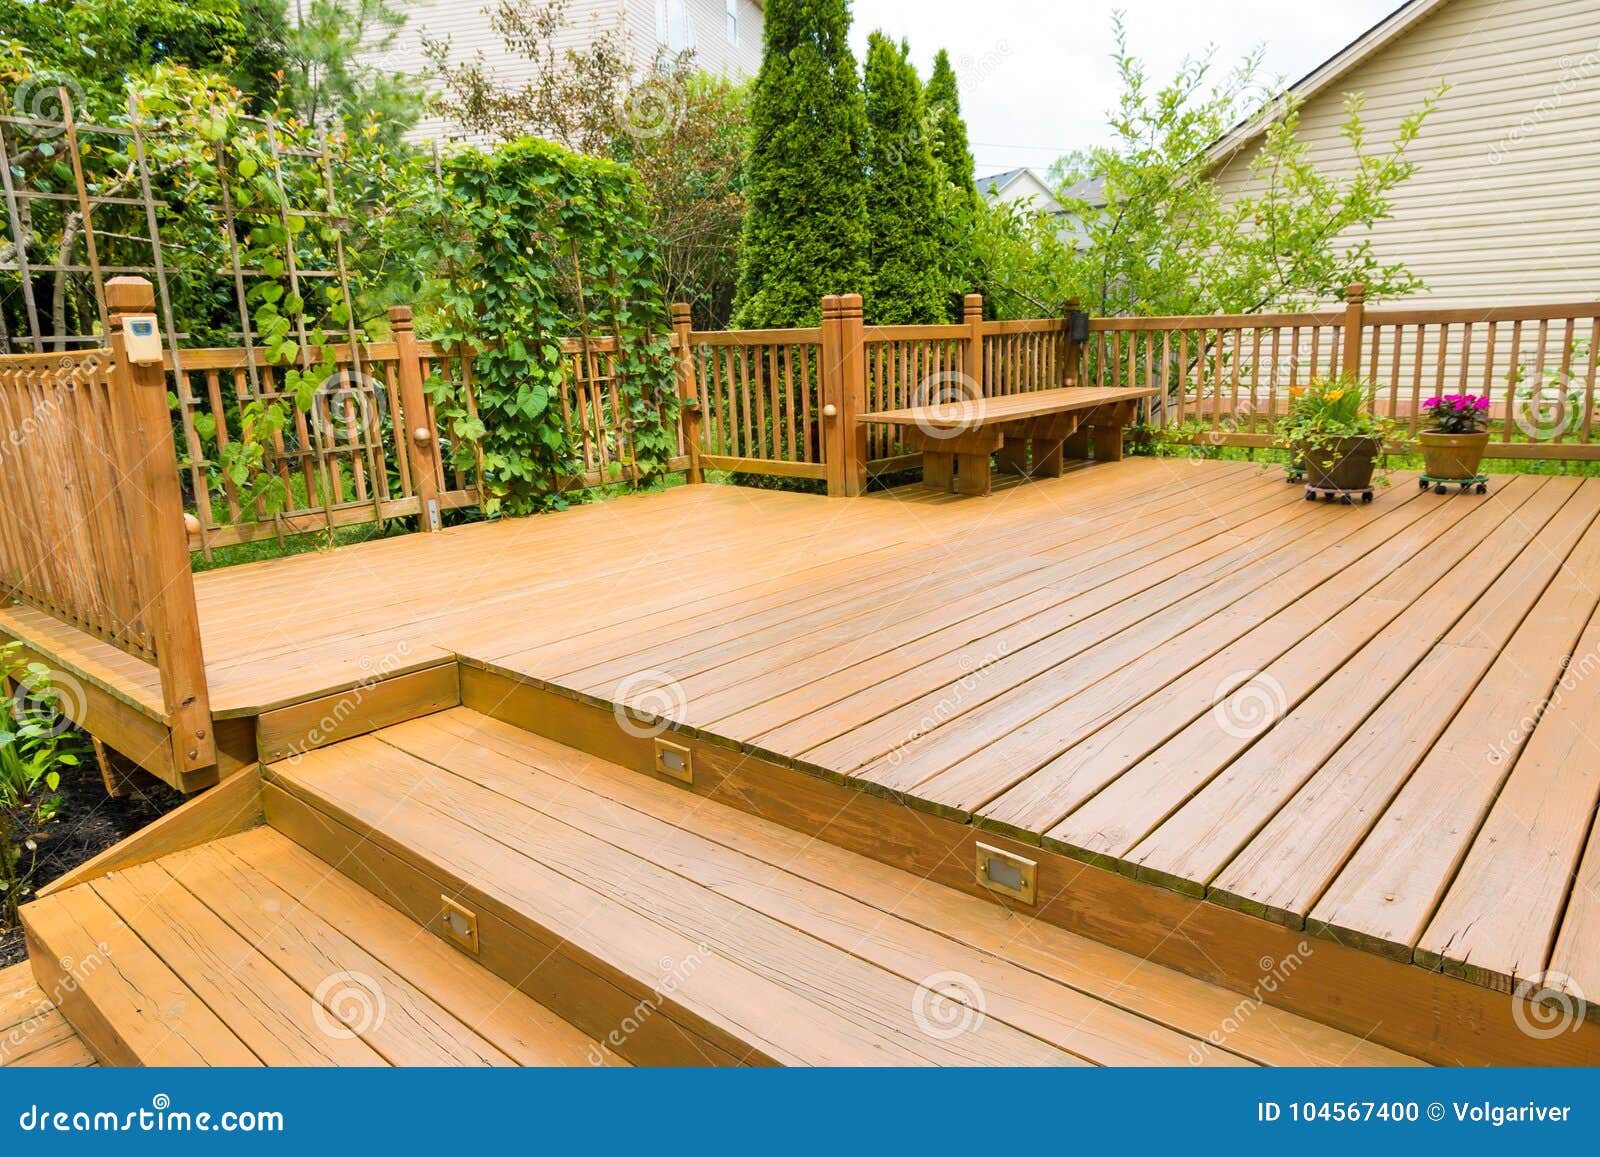 wooden deck of family home.